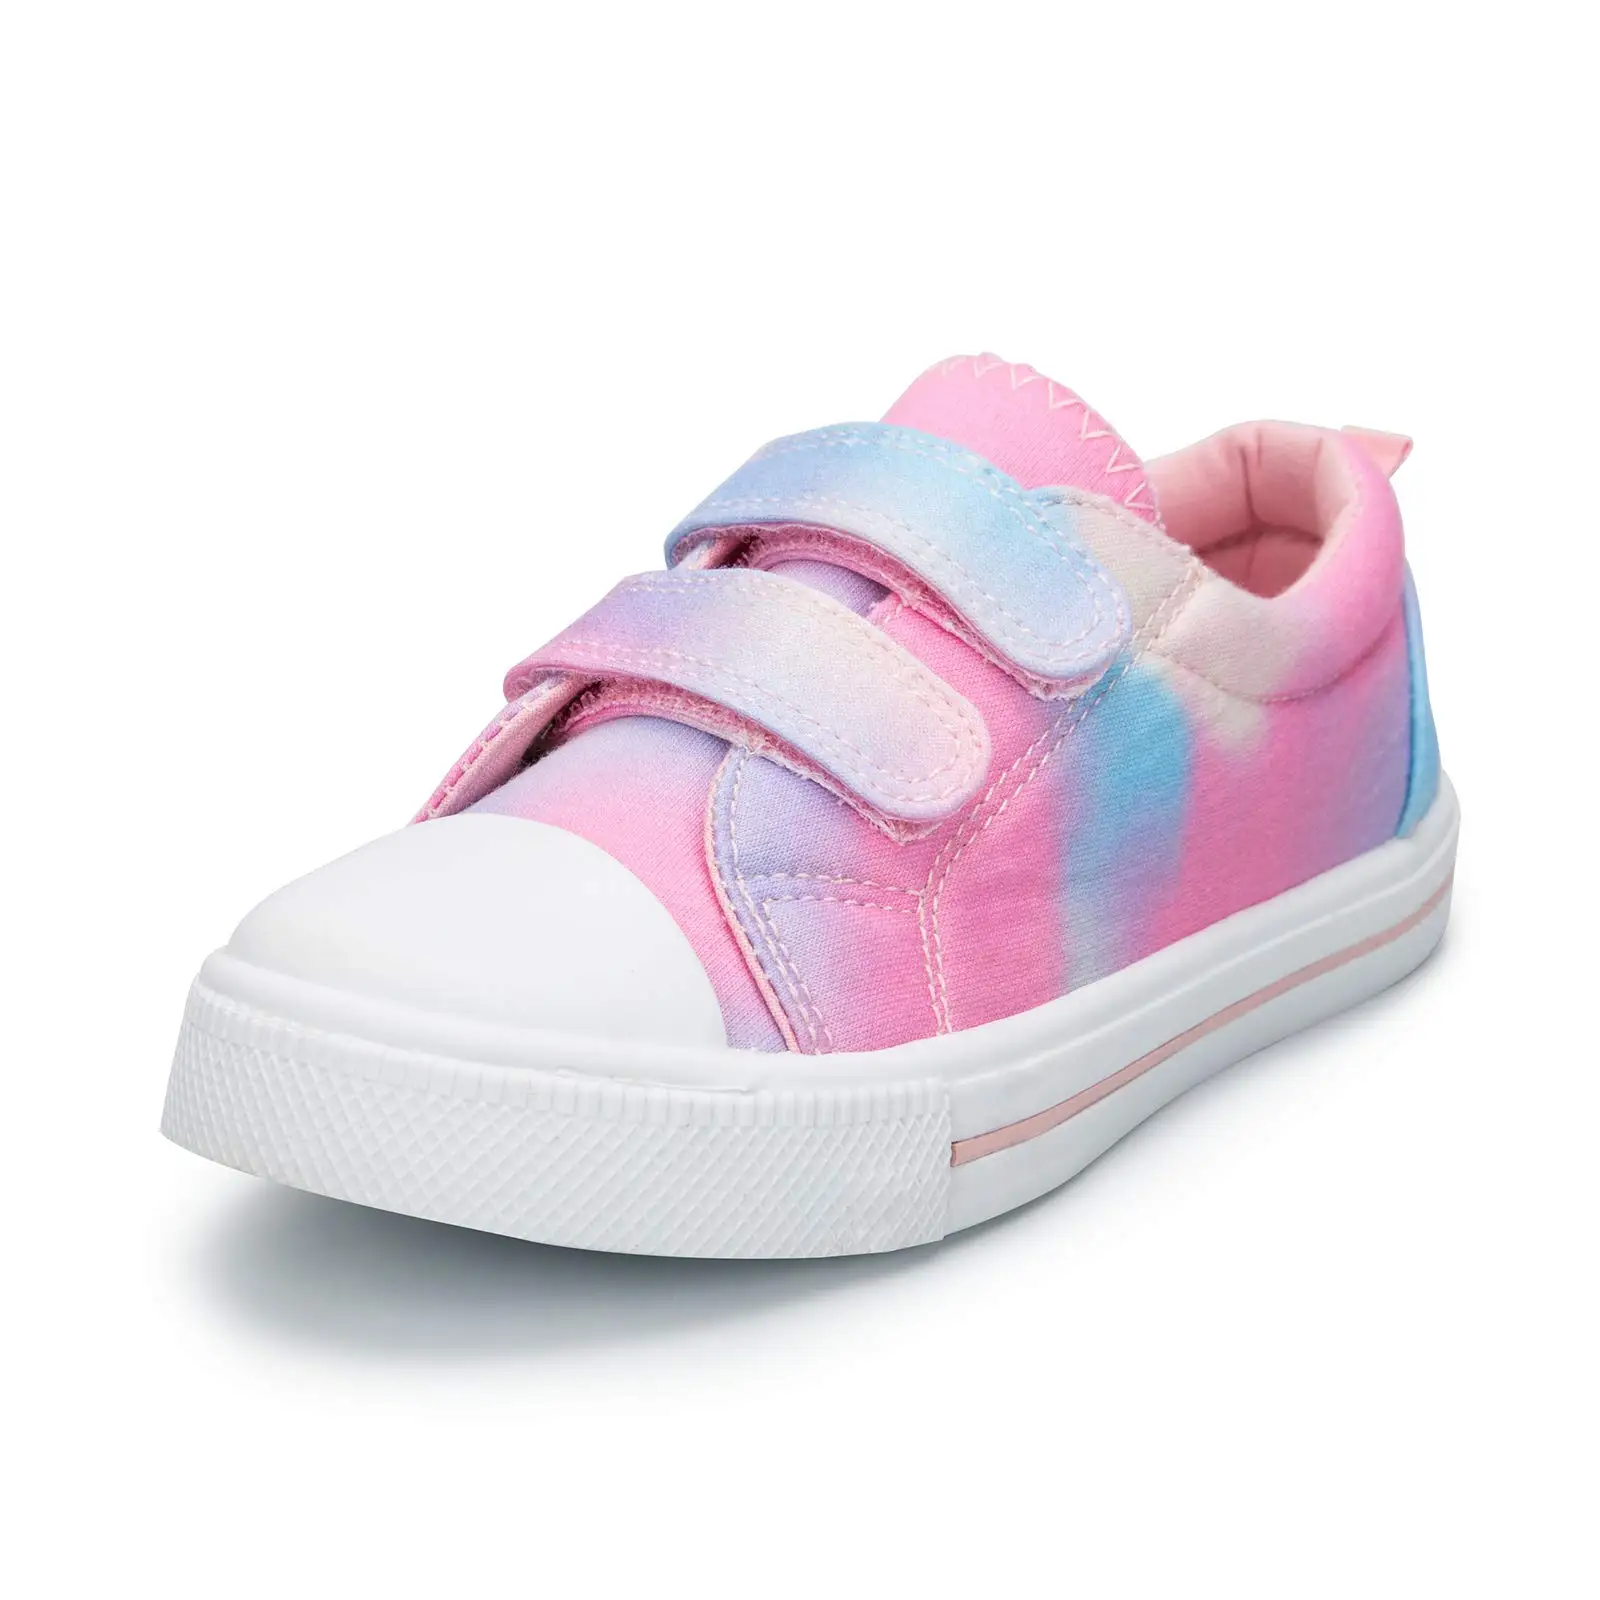 2022 High Quality Toddler Boys Girls Shoes Fashion Toddler Sneakers